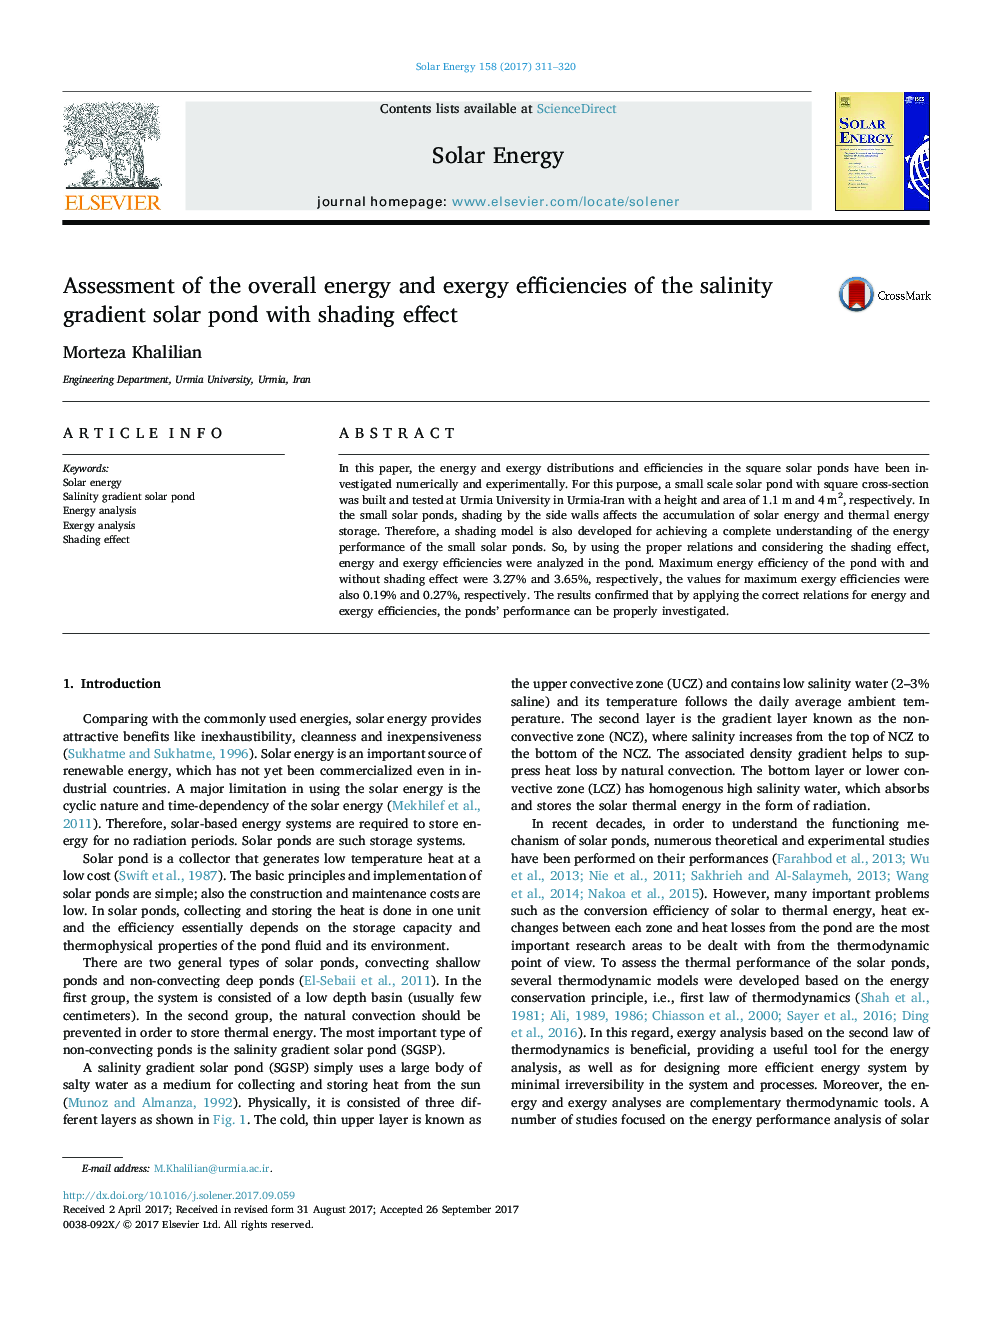 Assessment of the overall energy and exergy efficiencies of the salinity gradient solar pond with shading effect